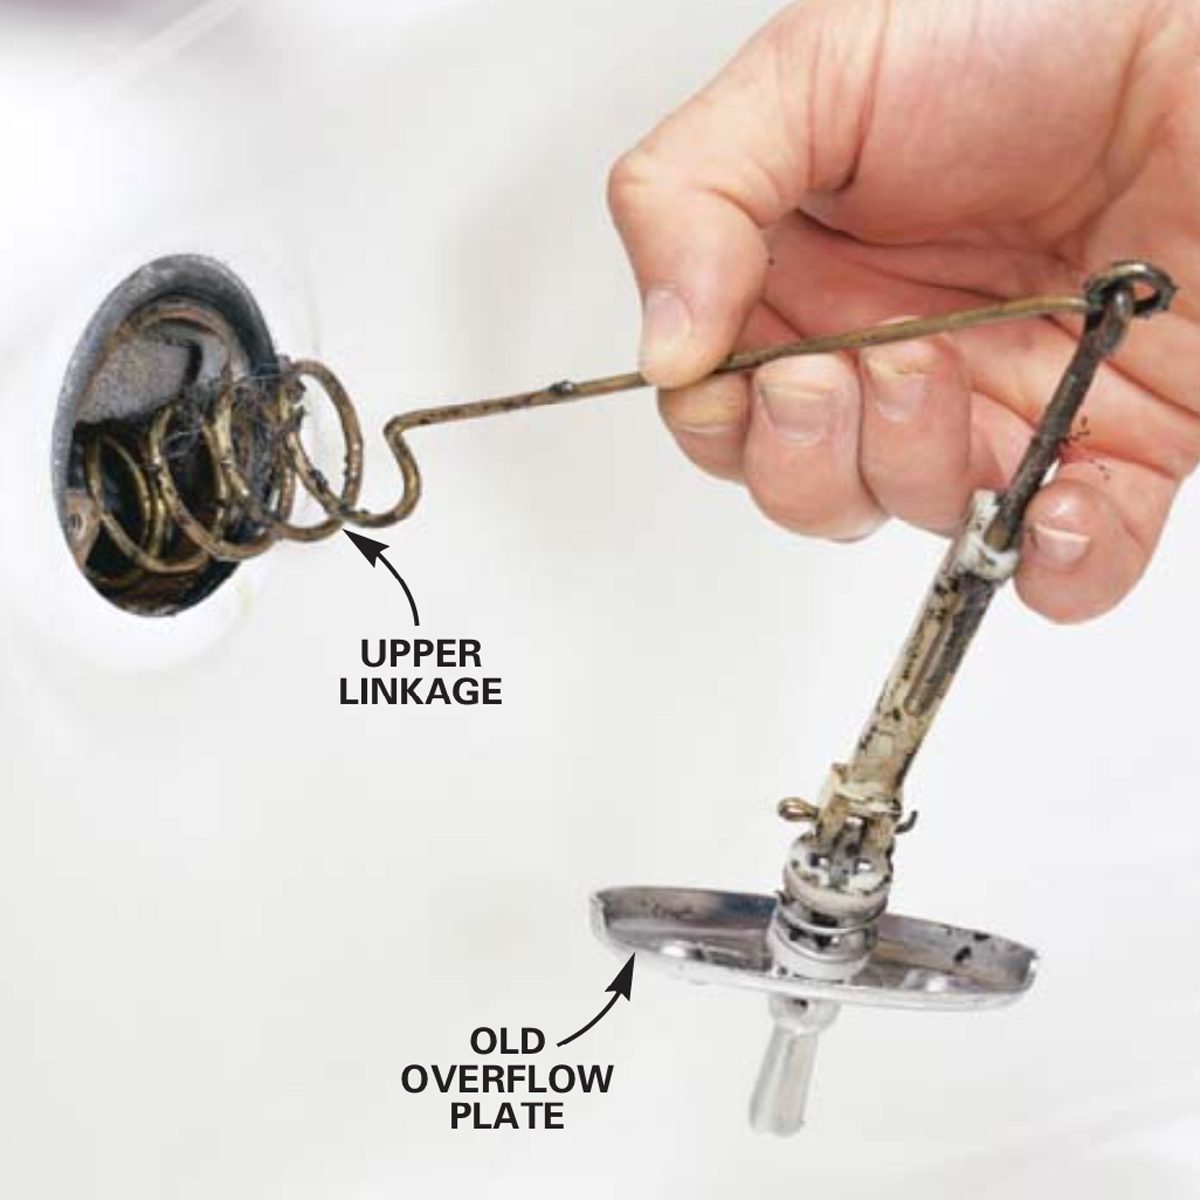 How to Convert Bathtub Drain Lever to a Lift and Turn